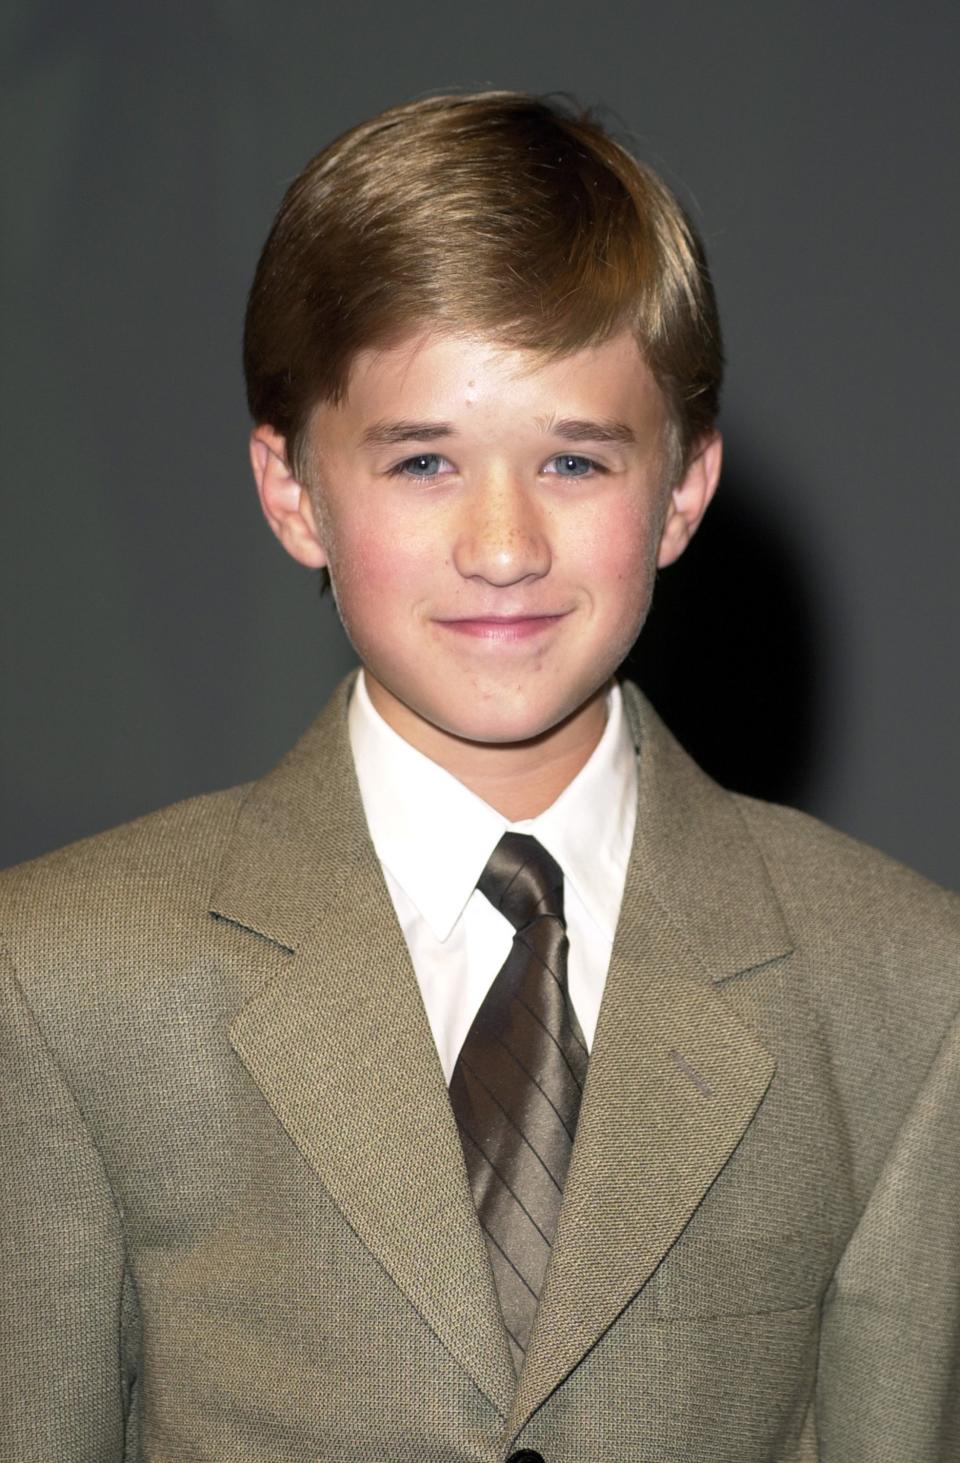 It was 20 years ago, on Aug. 6, 1999, that a young Haley Joel Osment told Bruce Willis, "I see dead people," in M. Night Shyamalan's <em>The Sixth Sense.</em> The Southern California native was discovered in the playroom of an IKEA, and a Pizza Hut commercial opened his world to roles in <em>Forrest Gump, The Sixth Sense </em>and <em>The Jeff Foxworthy Show, </em>among others. “He’s the most talented child actor I’ve ever seen,” Willis told PEOPLE in '99 as the film took off and Osment, older brother of <em>Hannah Montana </em>actress Emily, earned an Oscar nomination